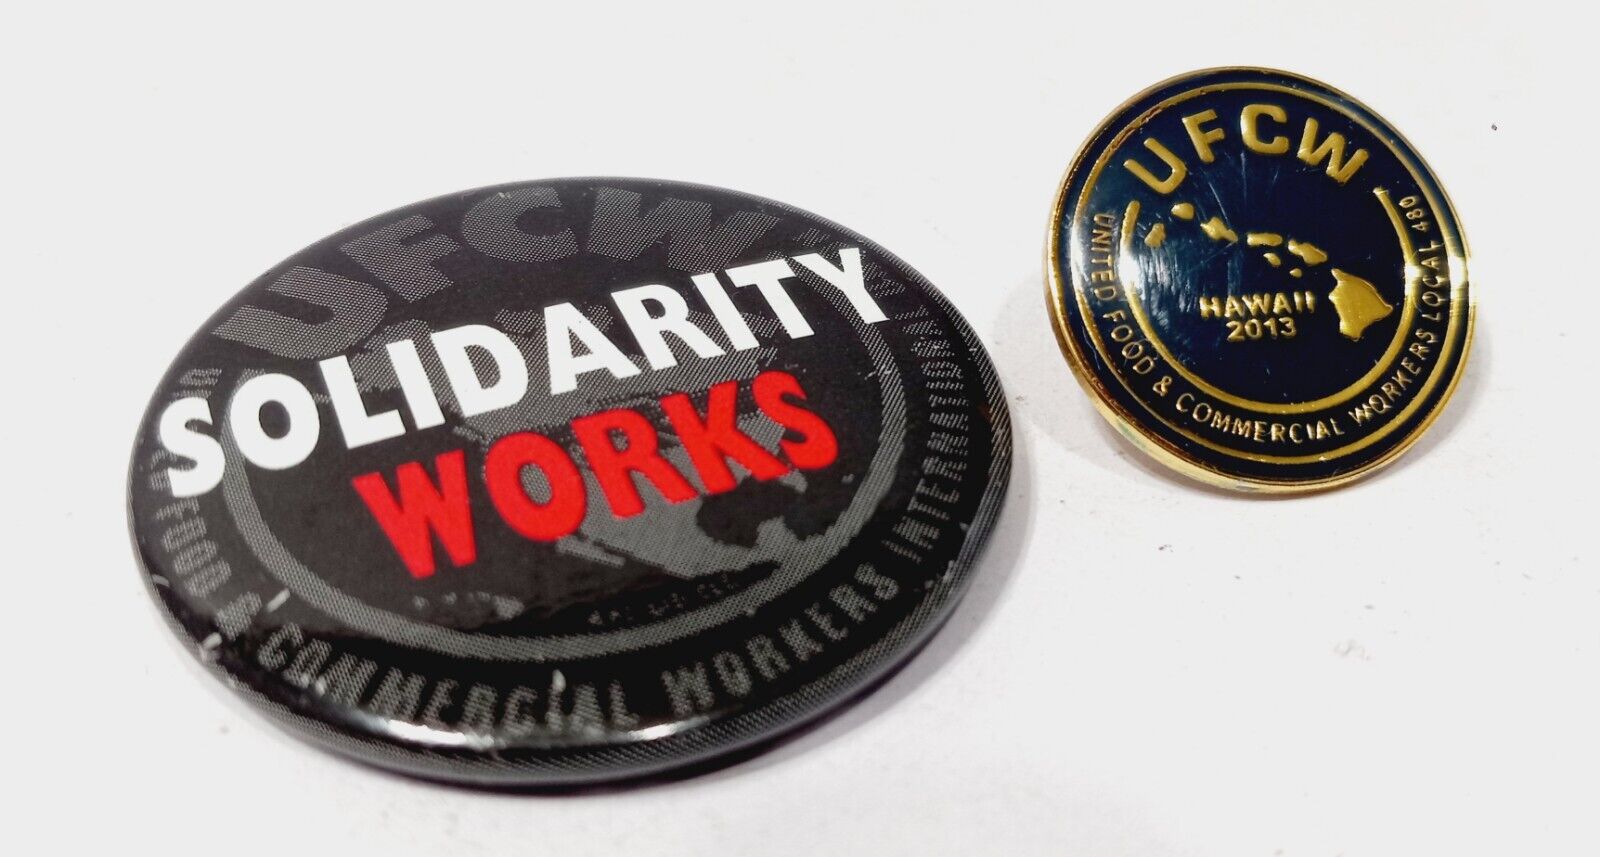 UFCW 2013 Hawaii Local 480 Lapel Hat Pin & Solidarity Works Button Pin Lot Of 2 